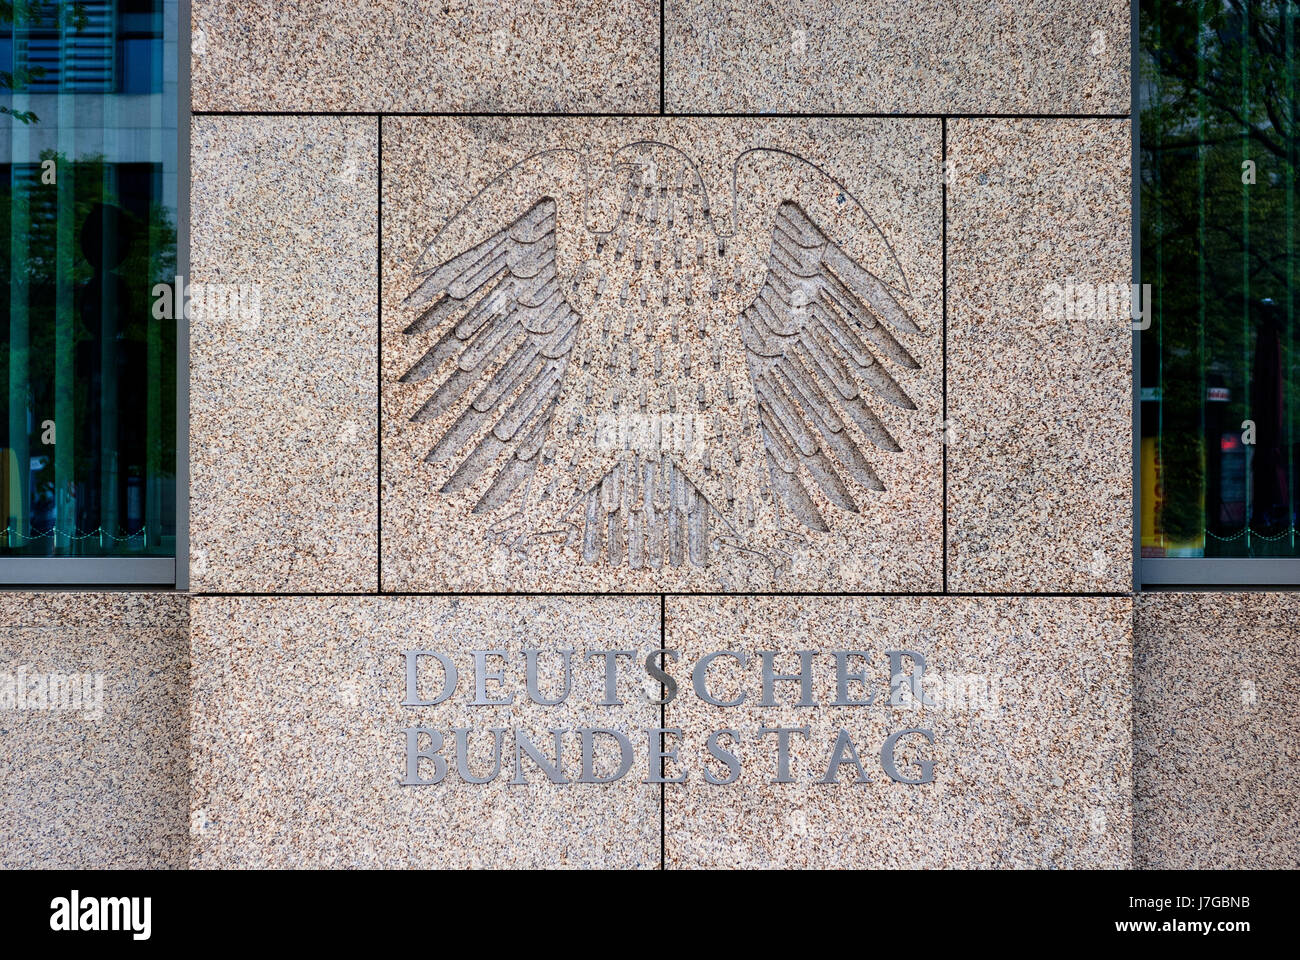 Relief federal eagle, German Parliament, Berlin, Germany Stock Photo